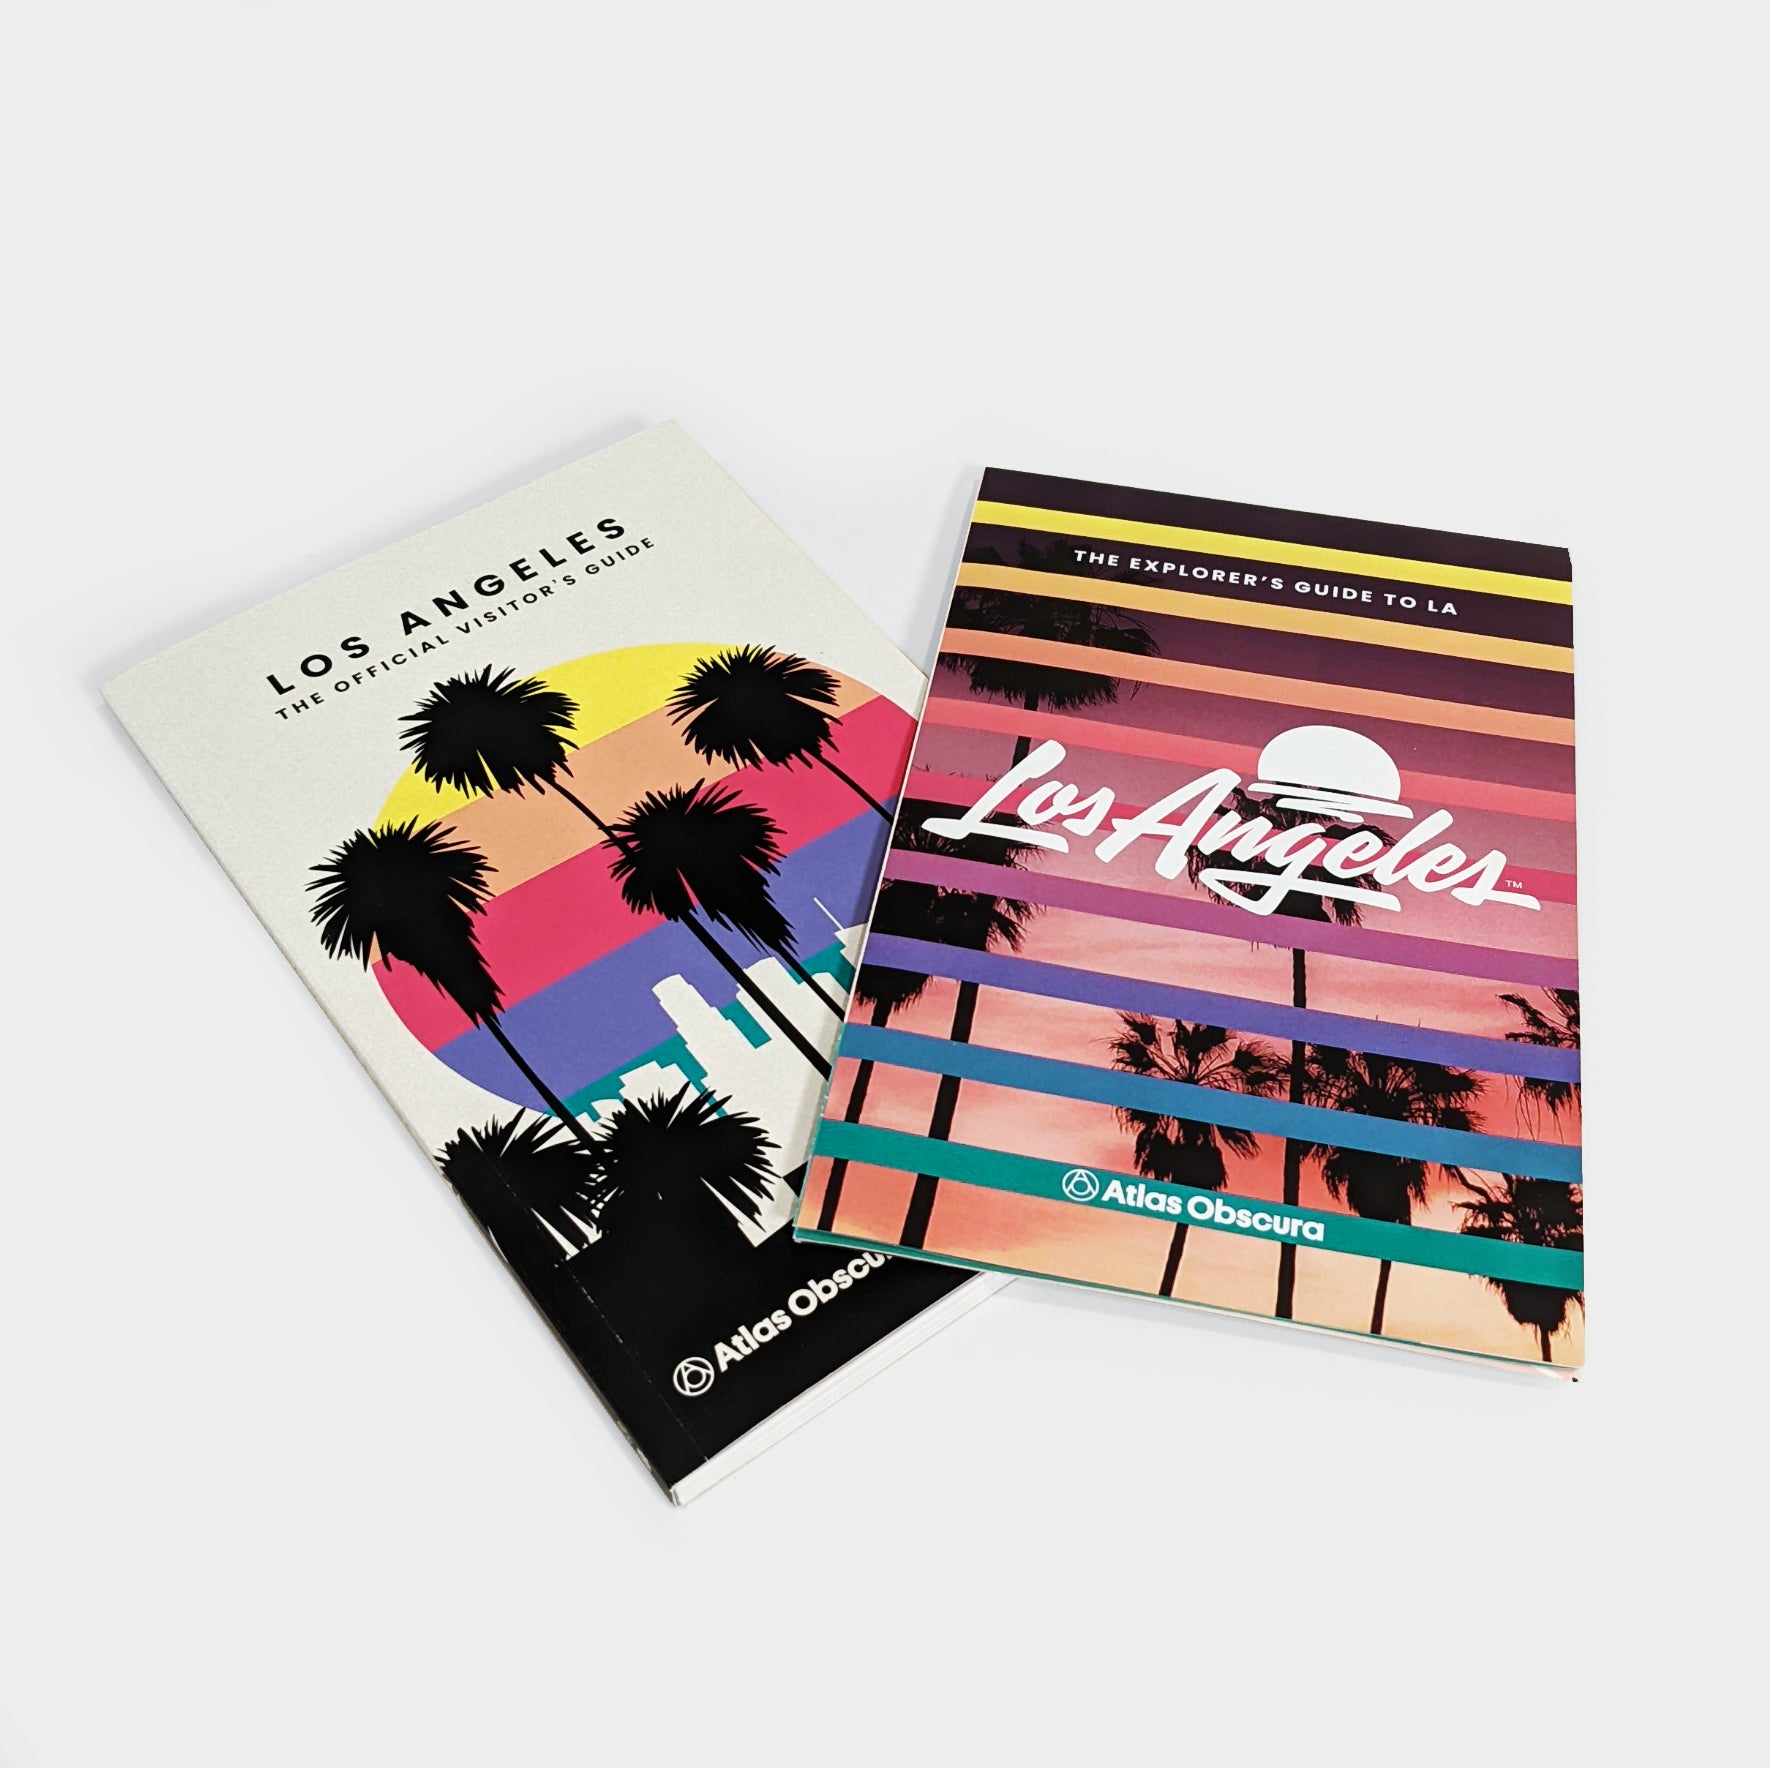 NEW TRAVEL BOOK: LOS ANGELES